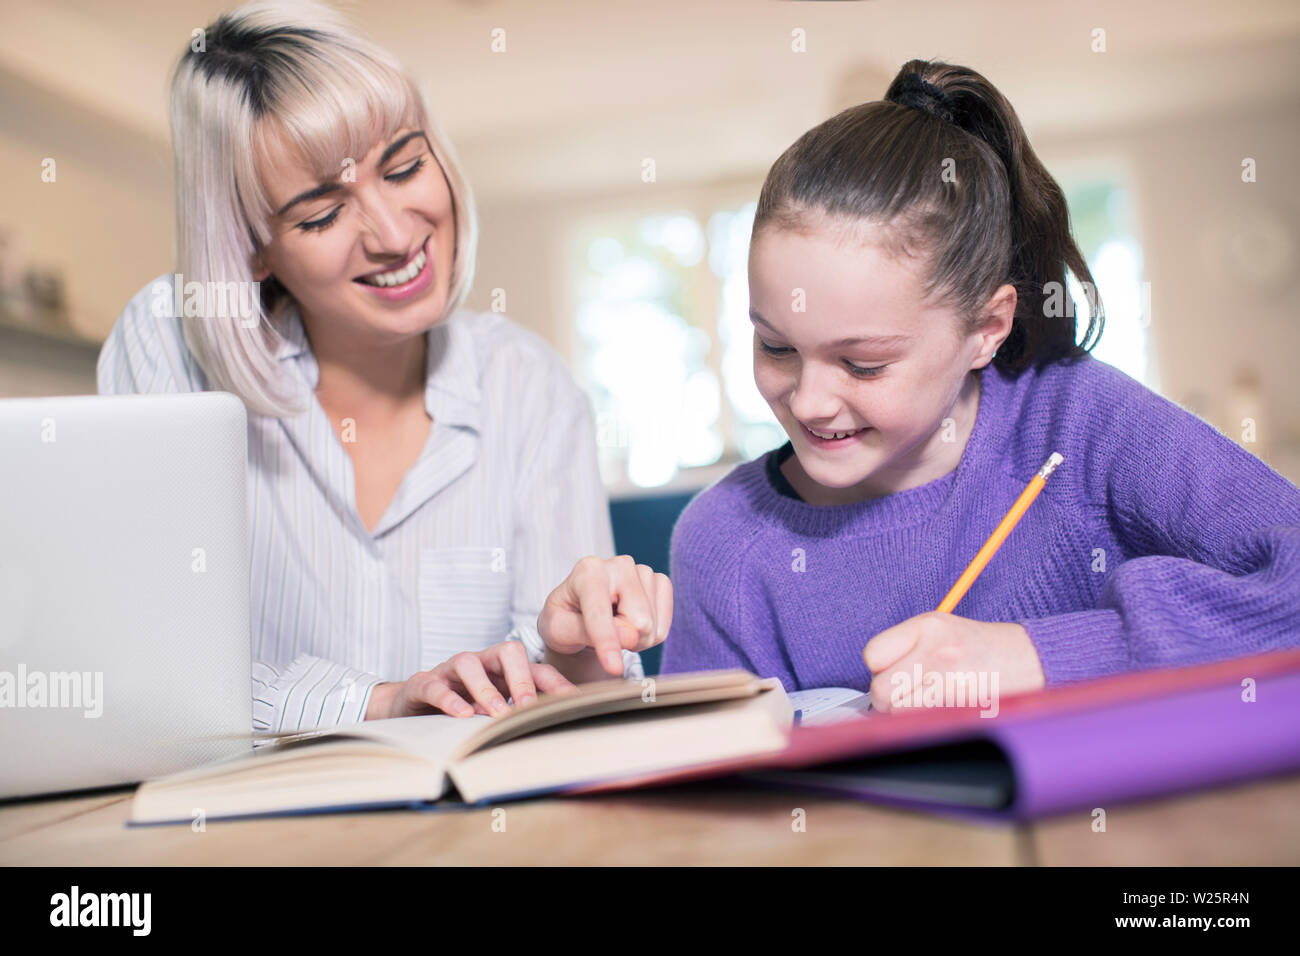 Female Home Tutor Helping Young Girl With Studies Stock Photo